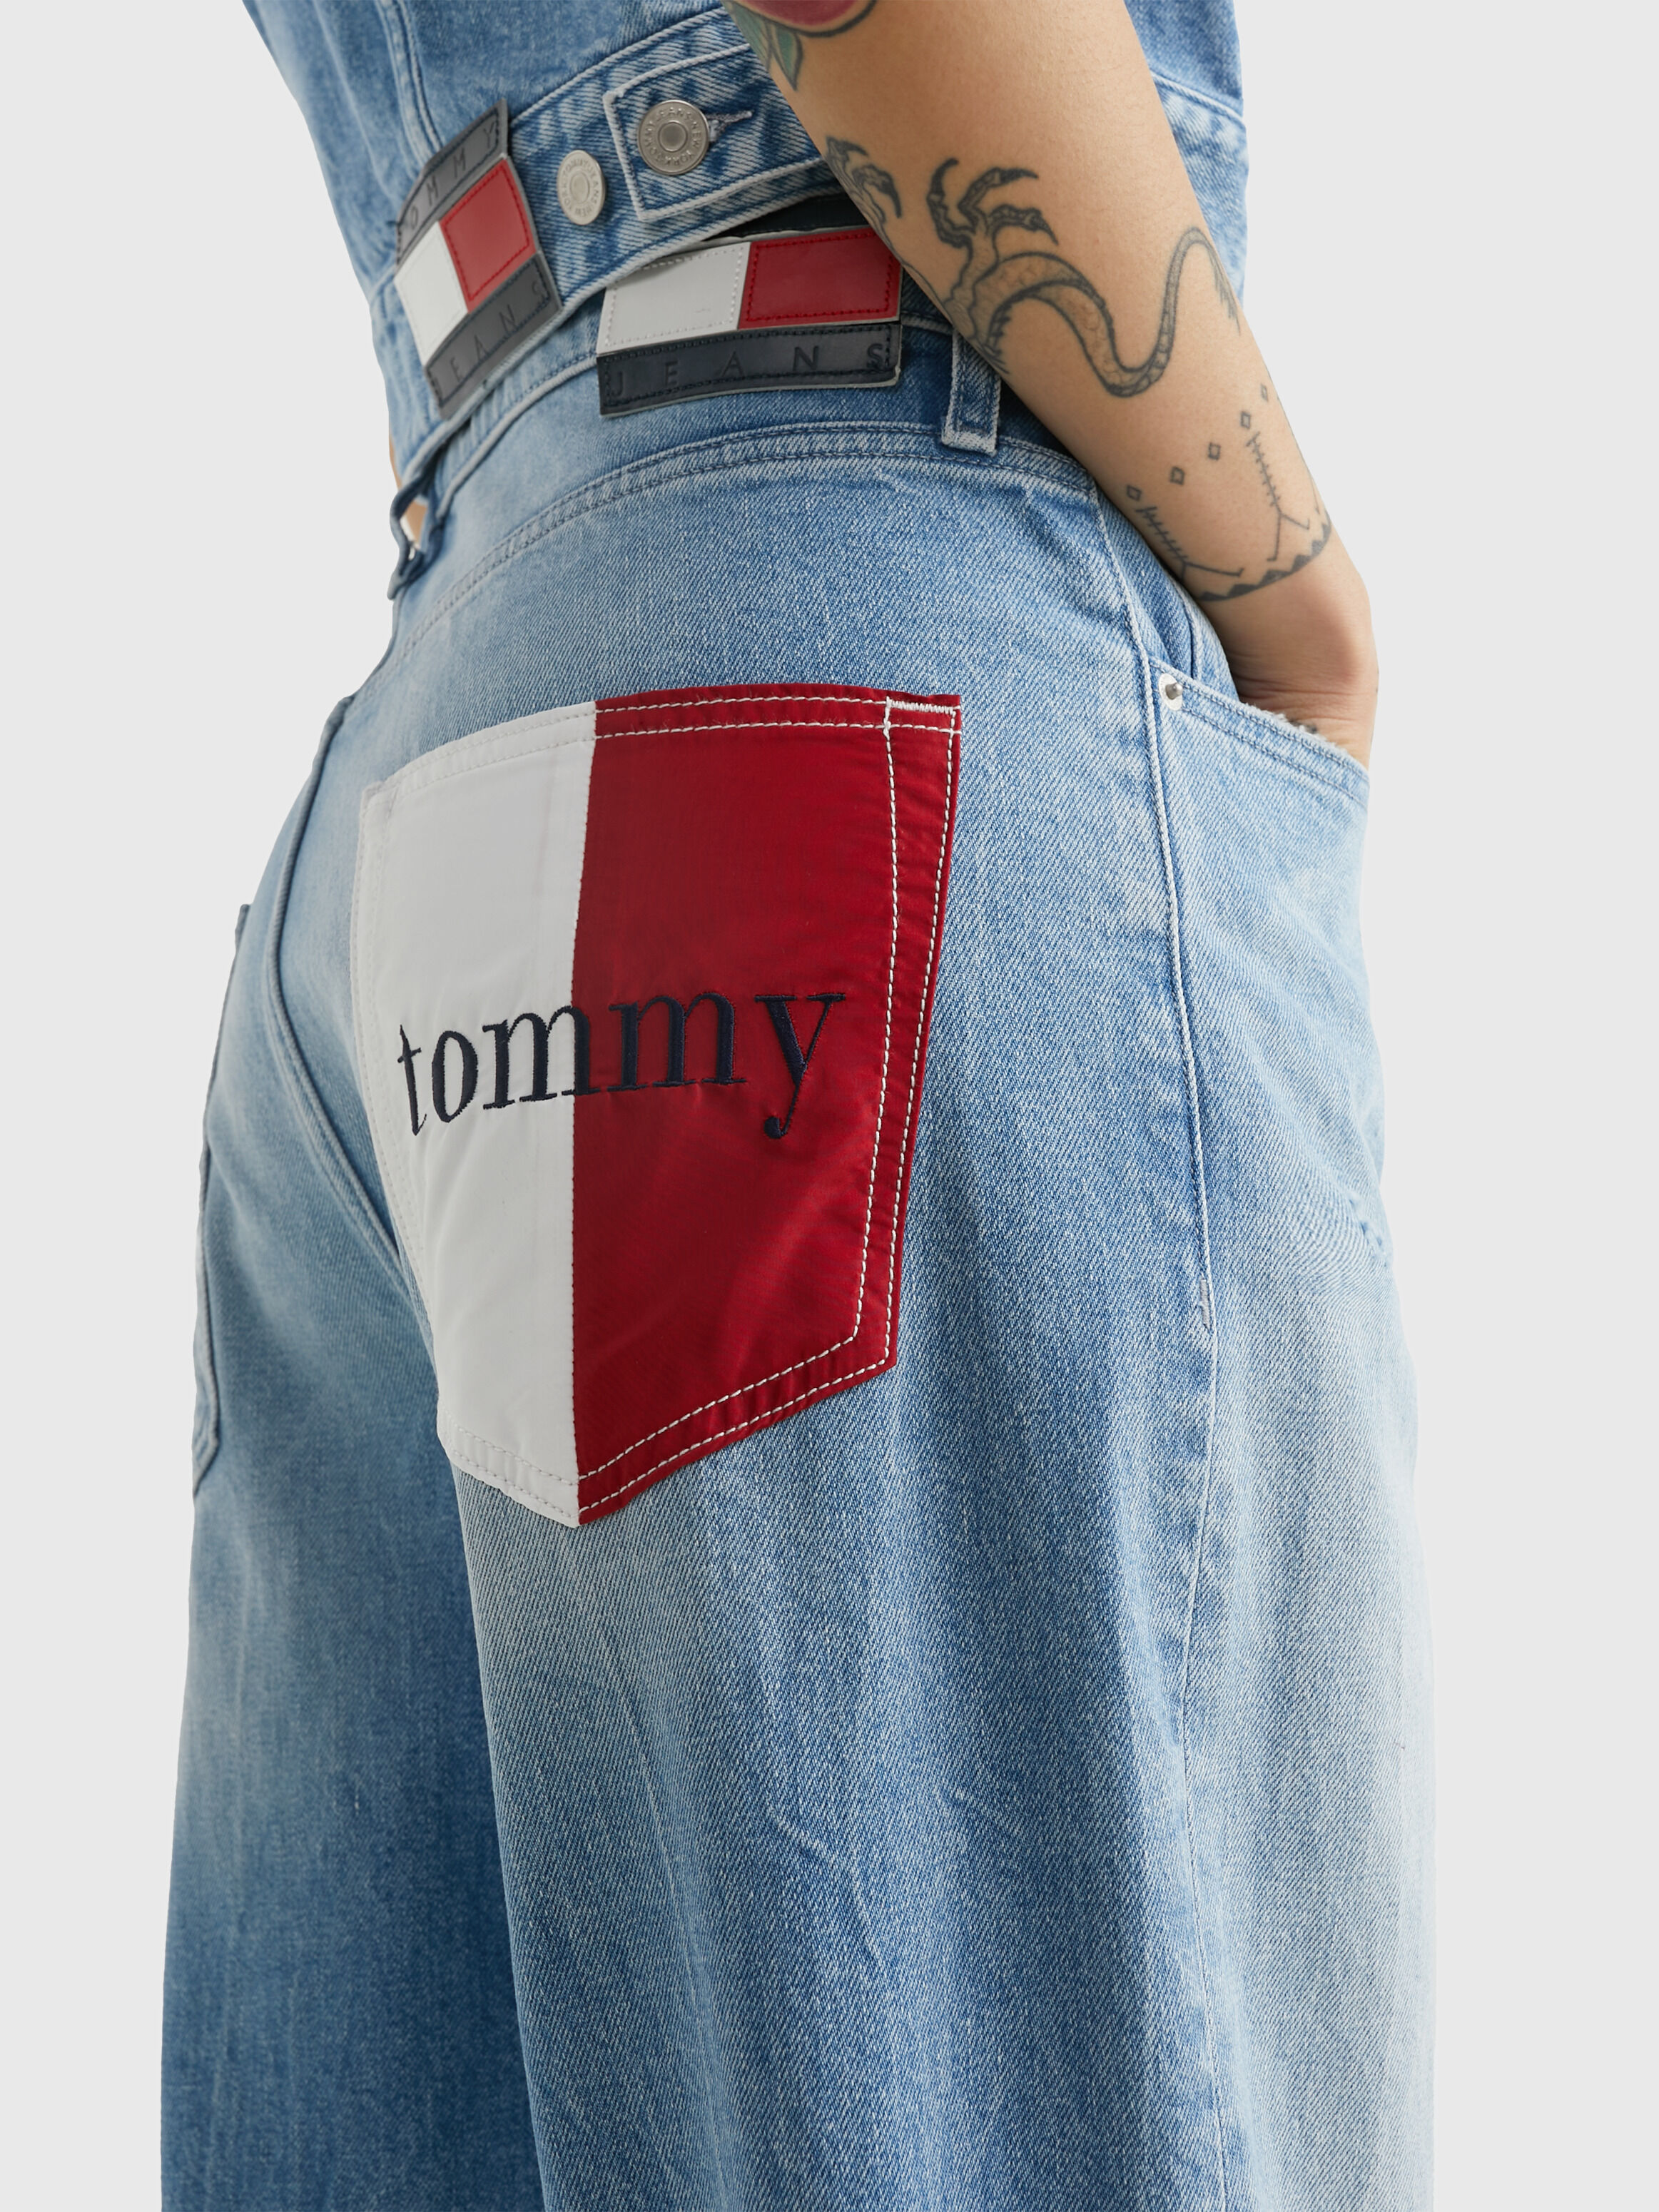 Tommy Collection by Tommy Jeans | Tommy Hilfiger Singapore